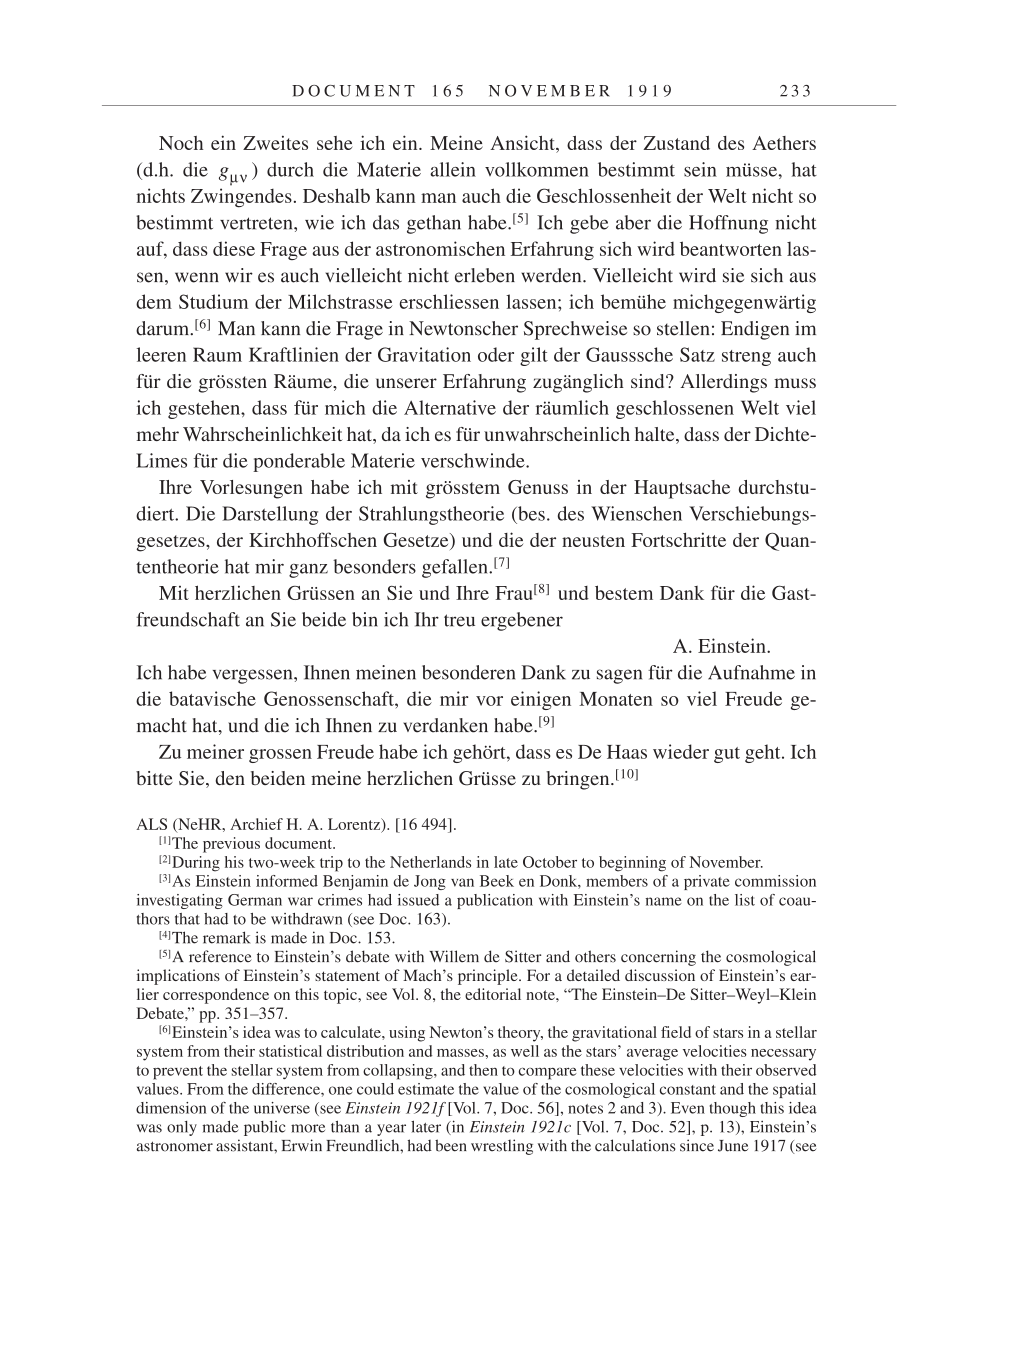 Volume 9: The Berlin Years: Correspondence January 1919-April 1920 page 233